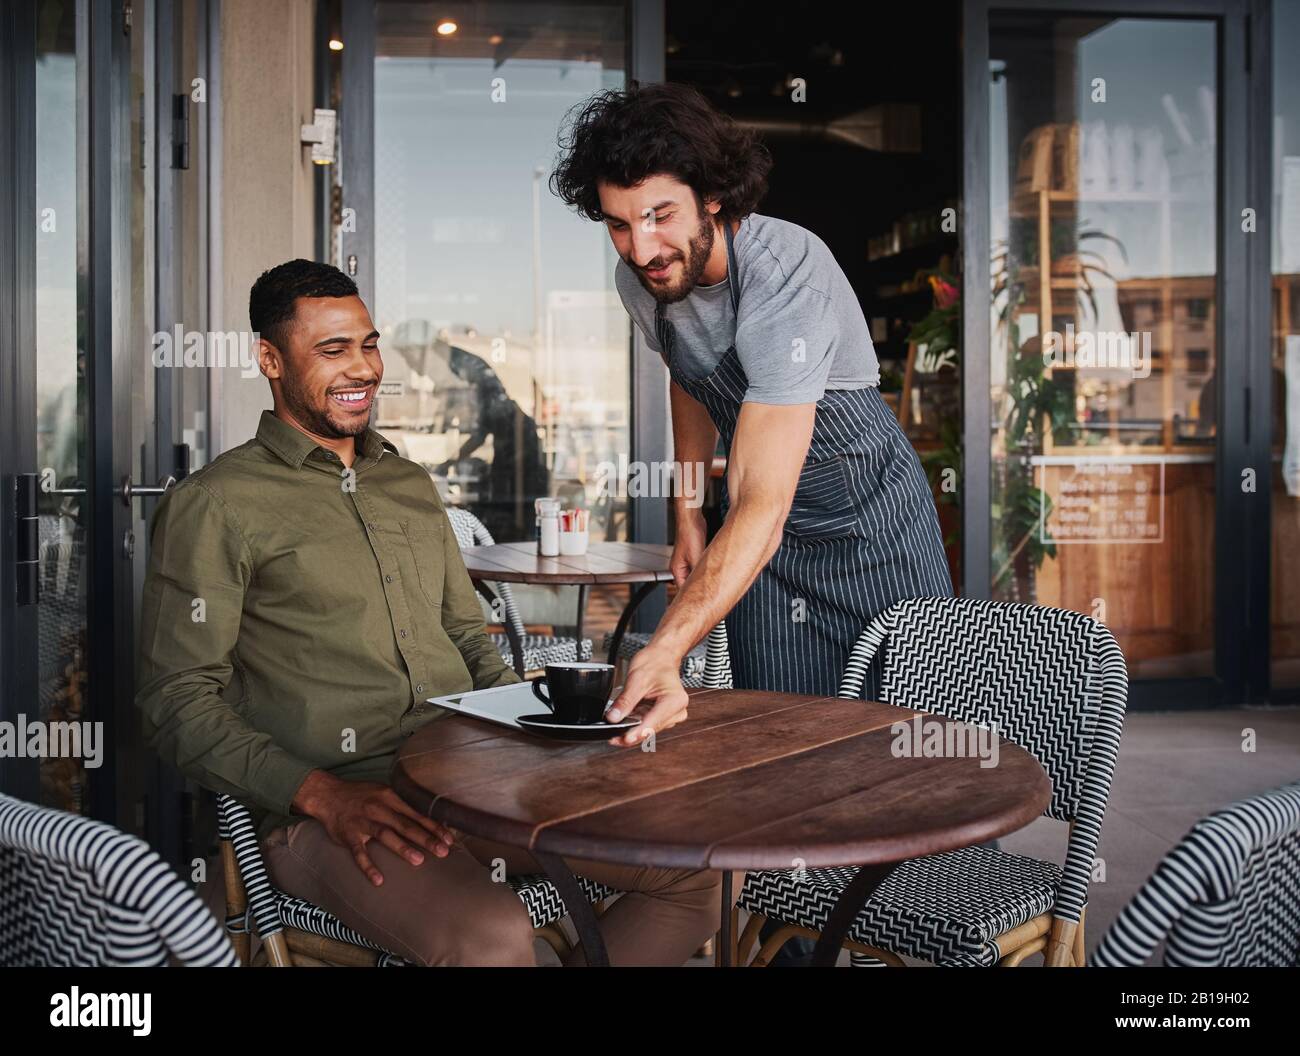 Cheerful young man serving afro-american customer at coffee shop Stock Photo